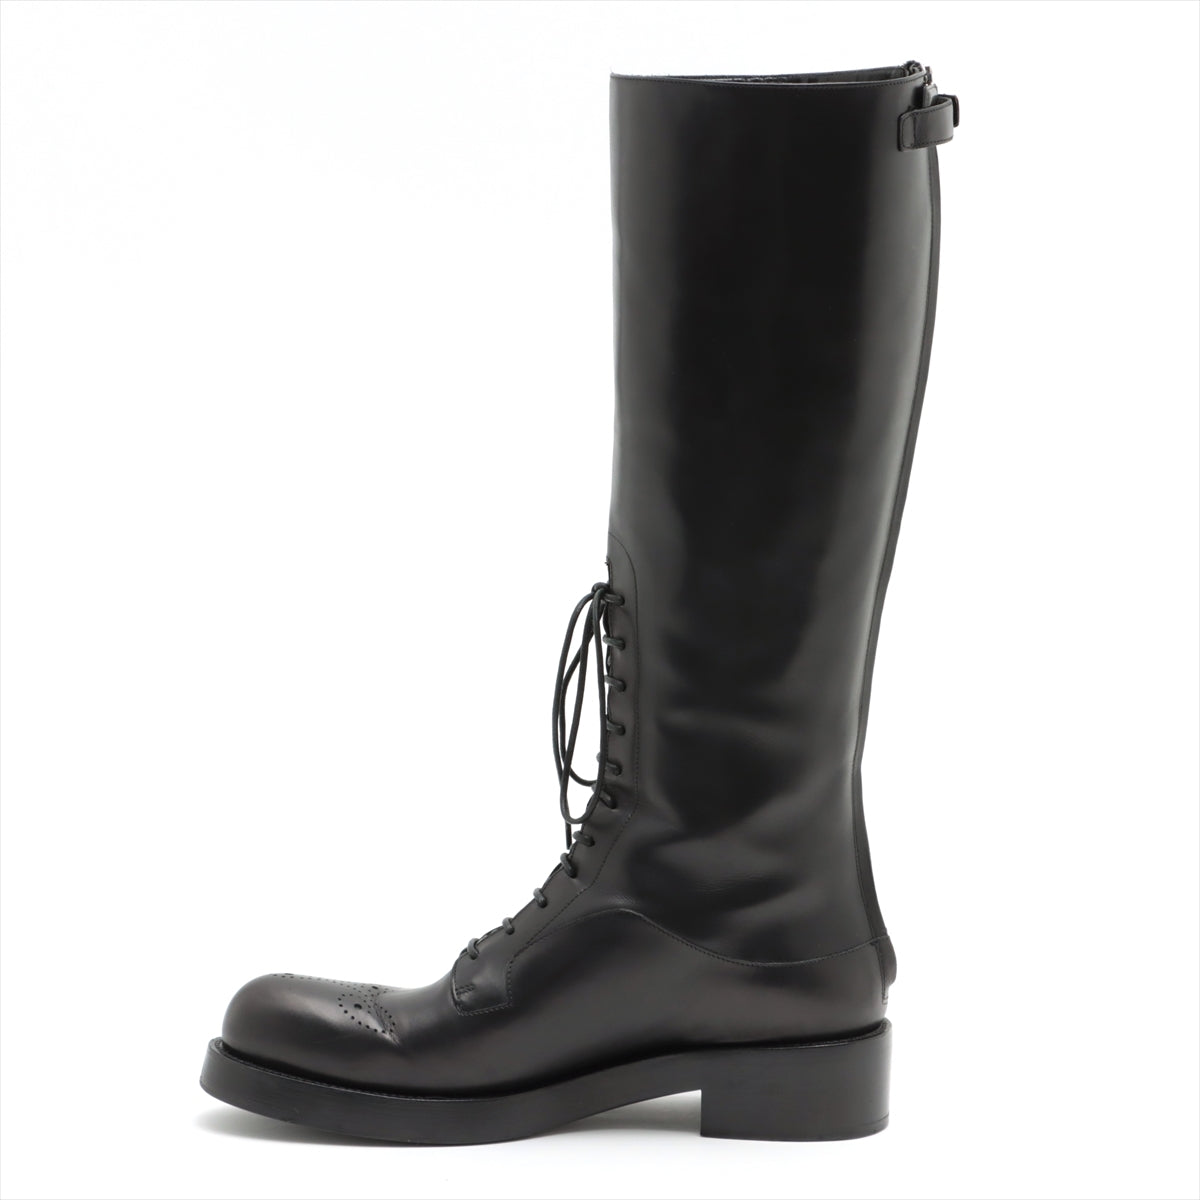 Prada Leather Long boots 38 Ladies' Black Lace up